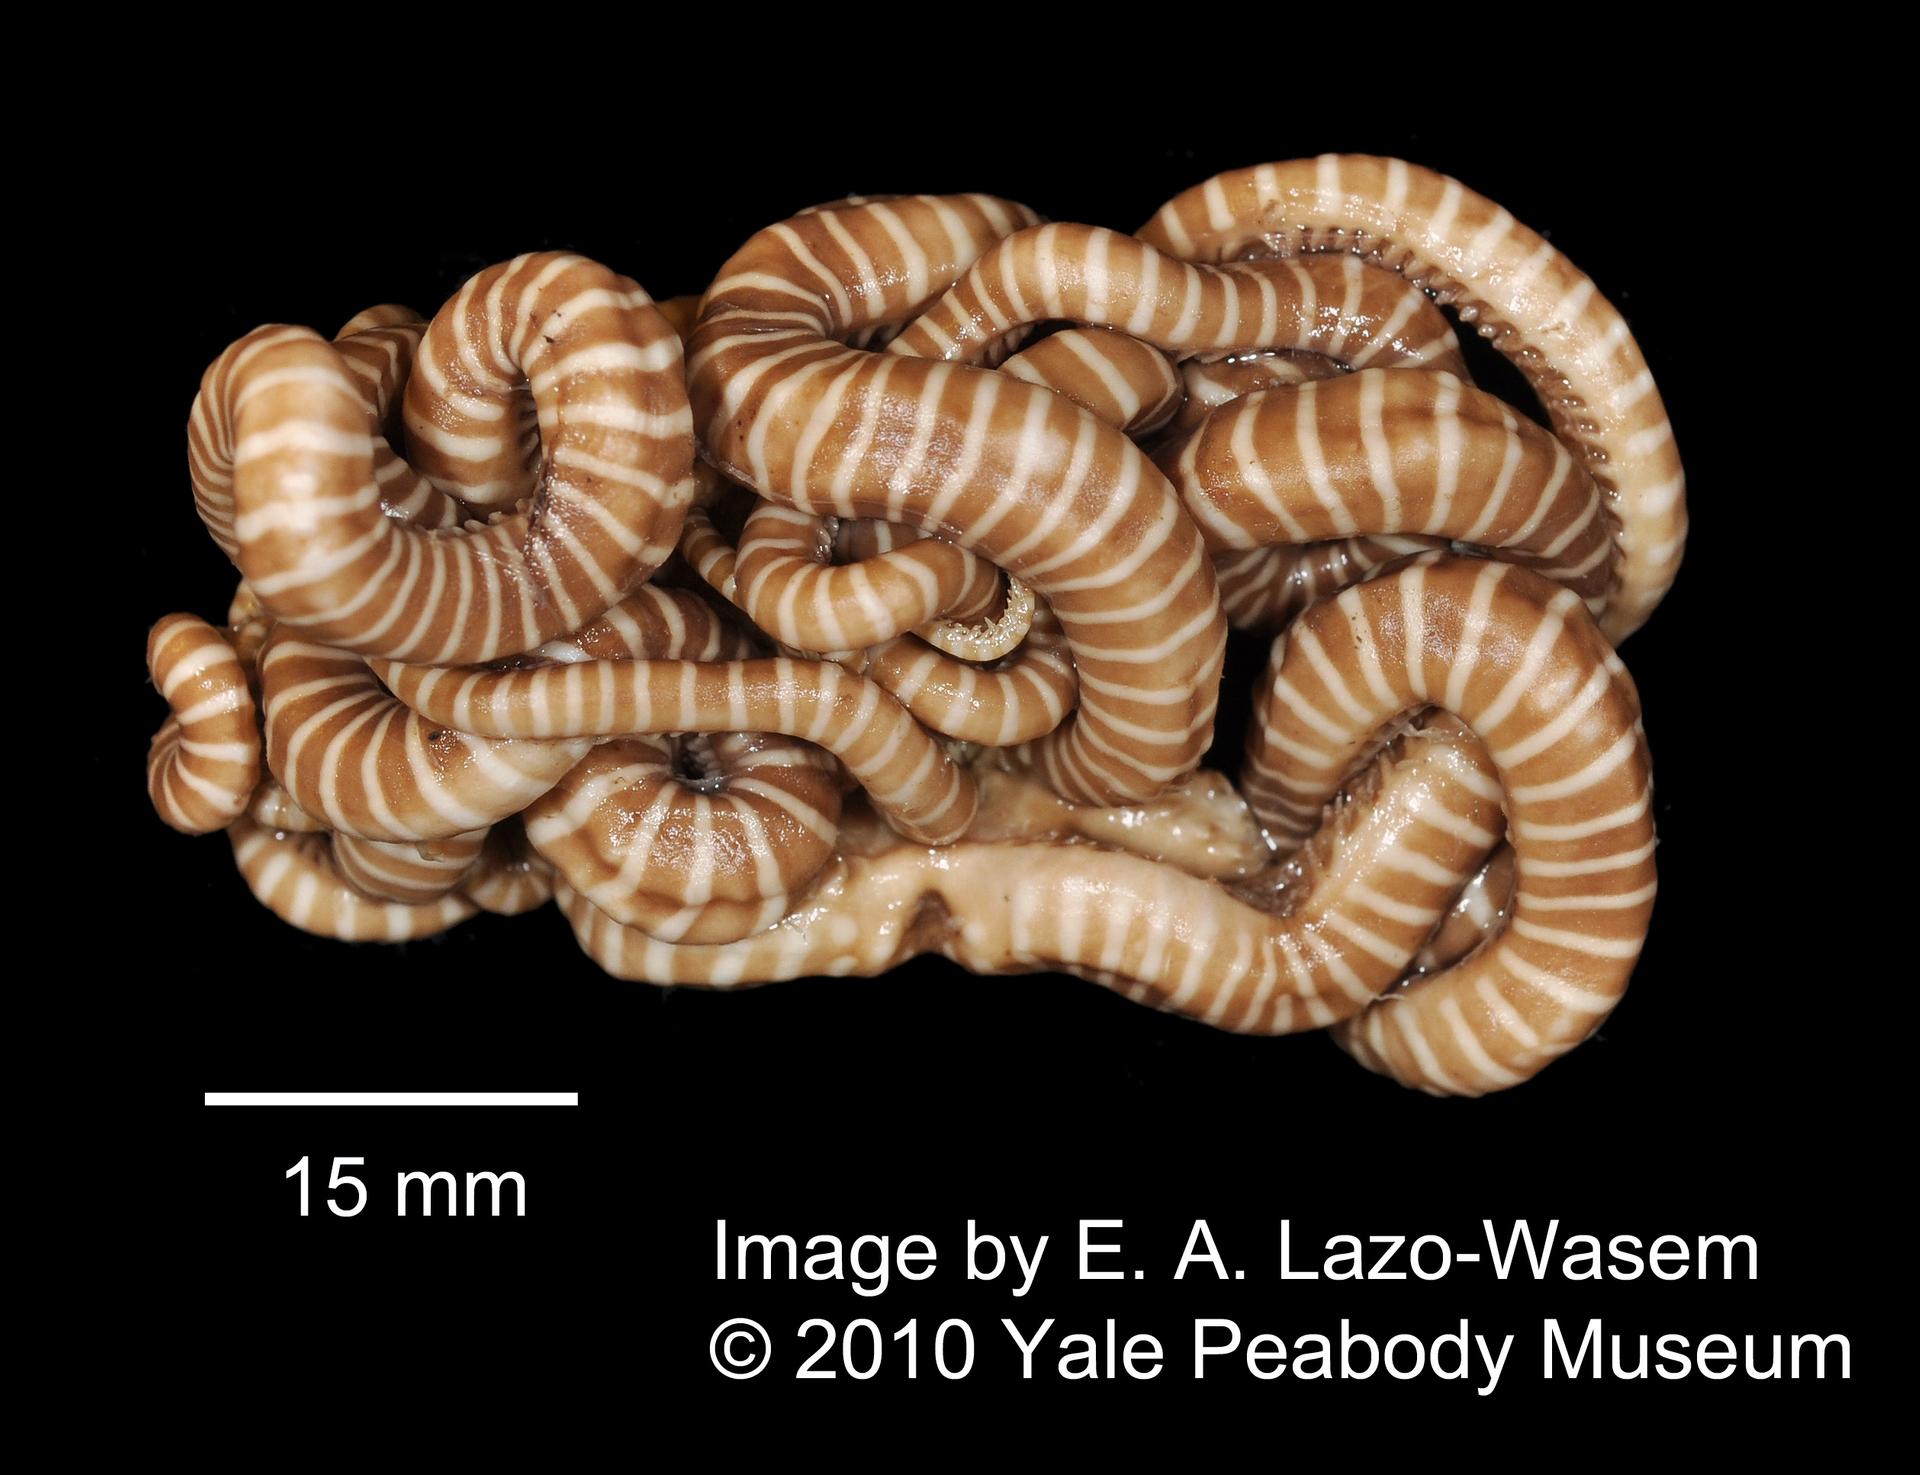 To Yale Peabody Museum of Natural History (YPM IZ 049800)